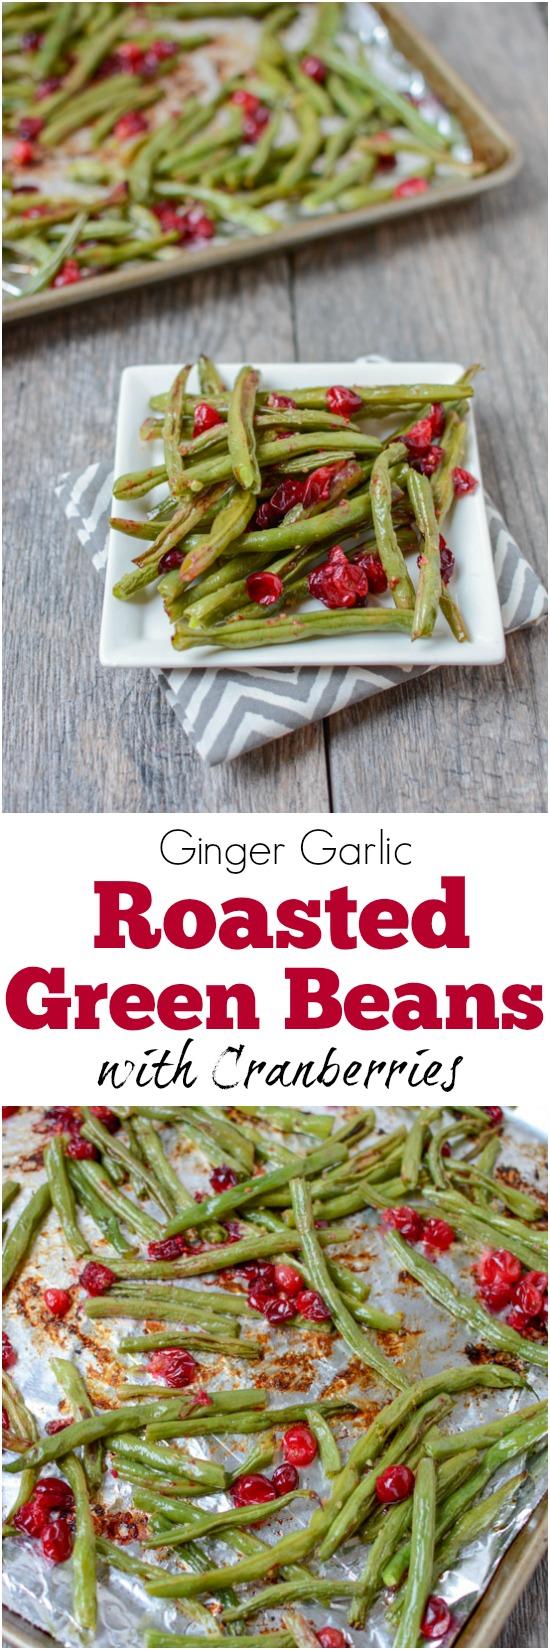 Bursting with flavor, these Roasted Ginger Garlic Green Beans with Cranberries make a great holiday side dish or a simple addition to your weeknight dinner table. 